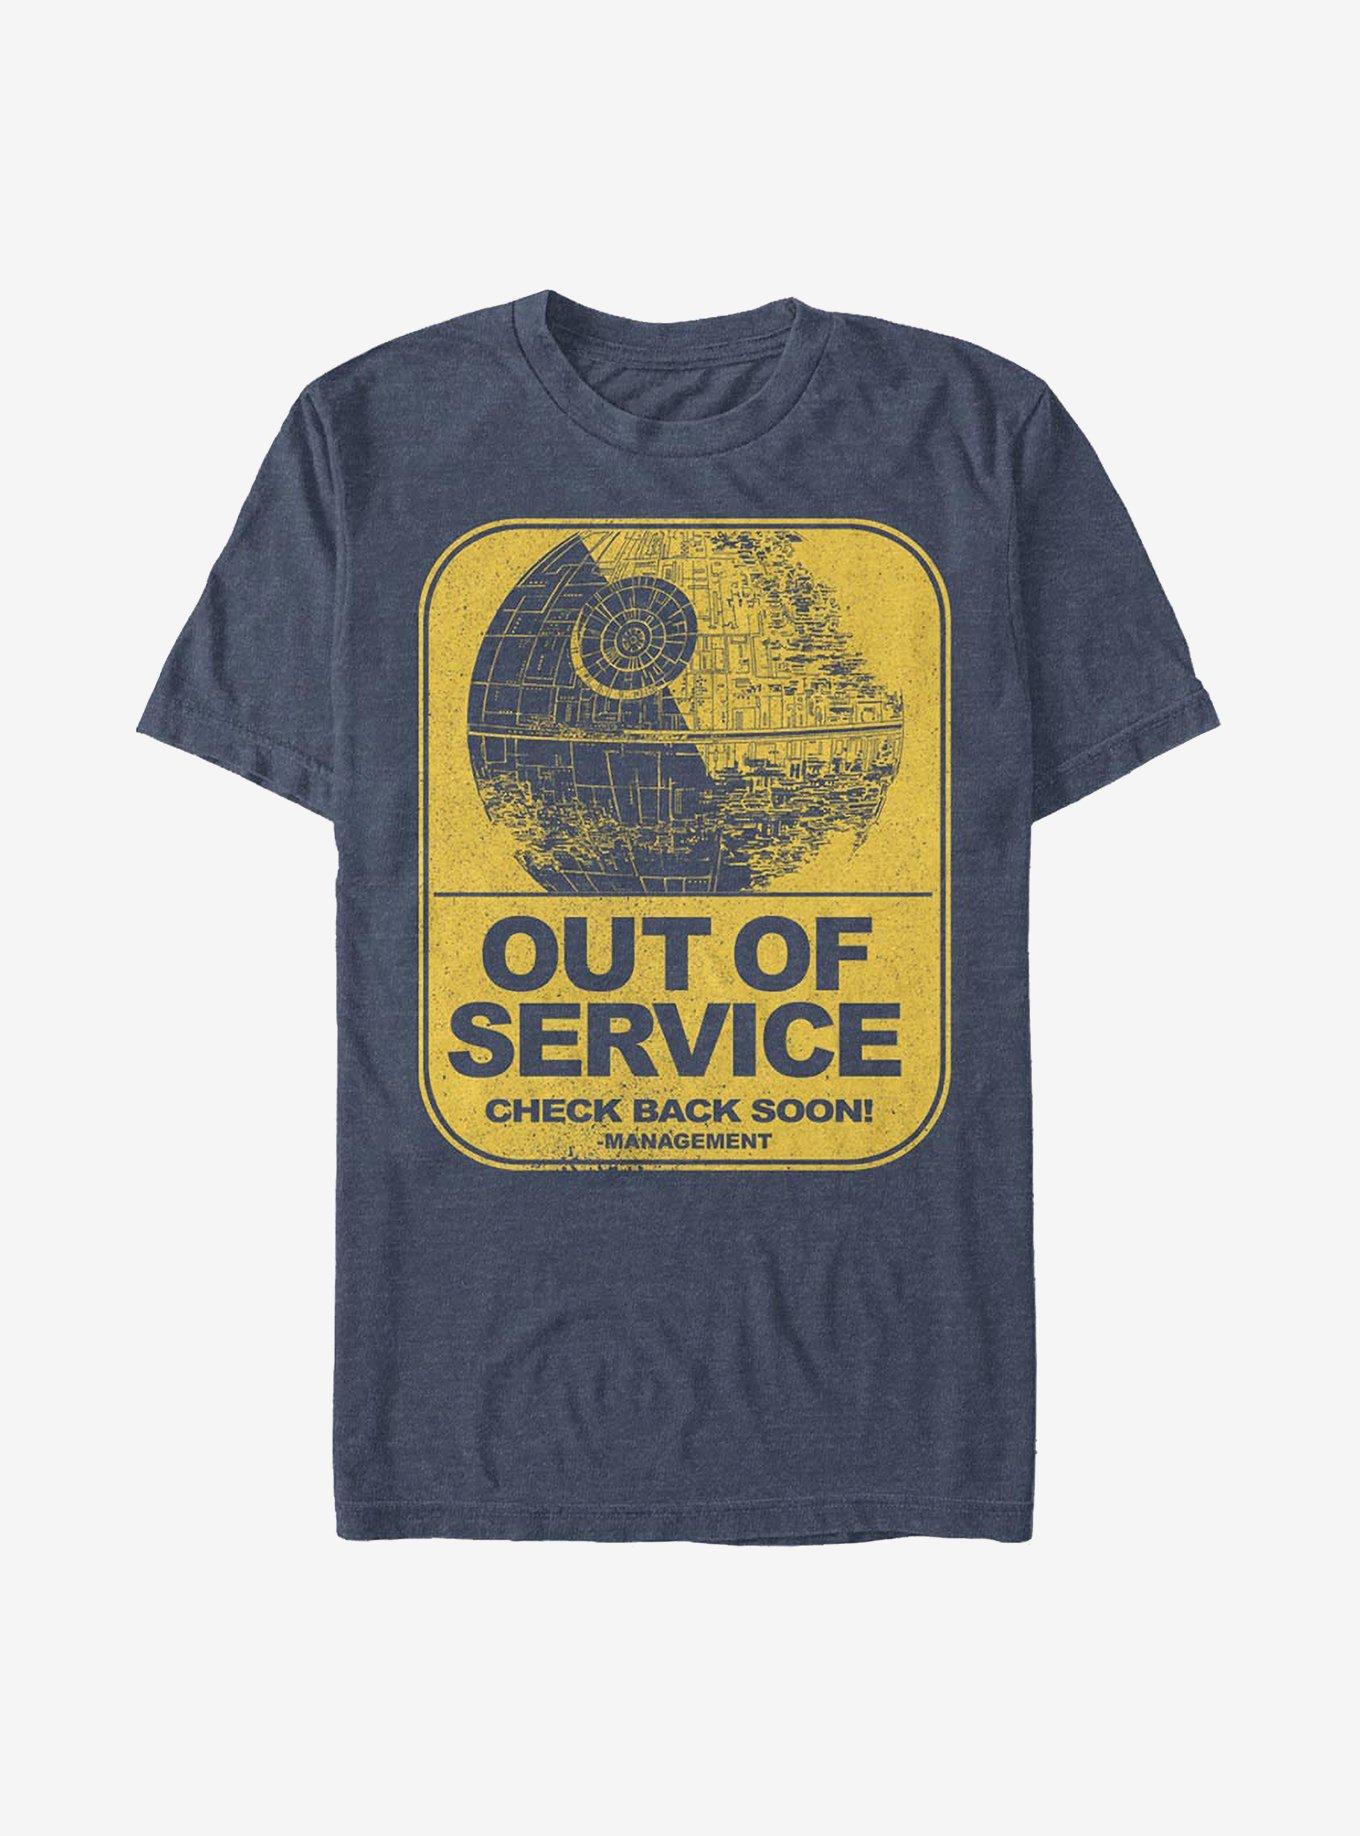 Star Wars Out Of Service T-Shirt, , hi-res